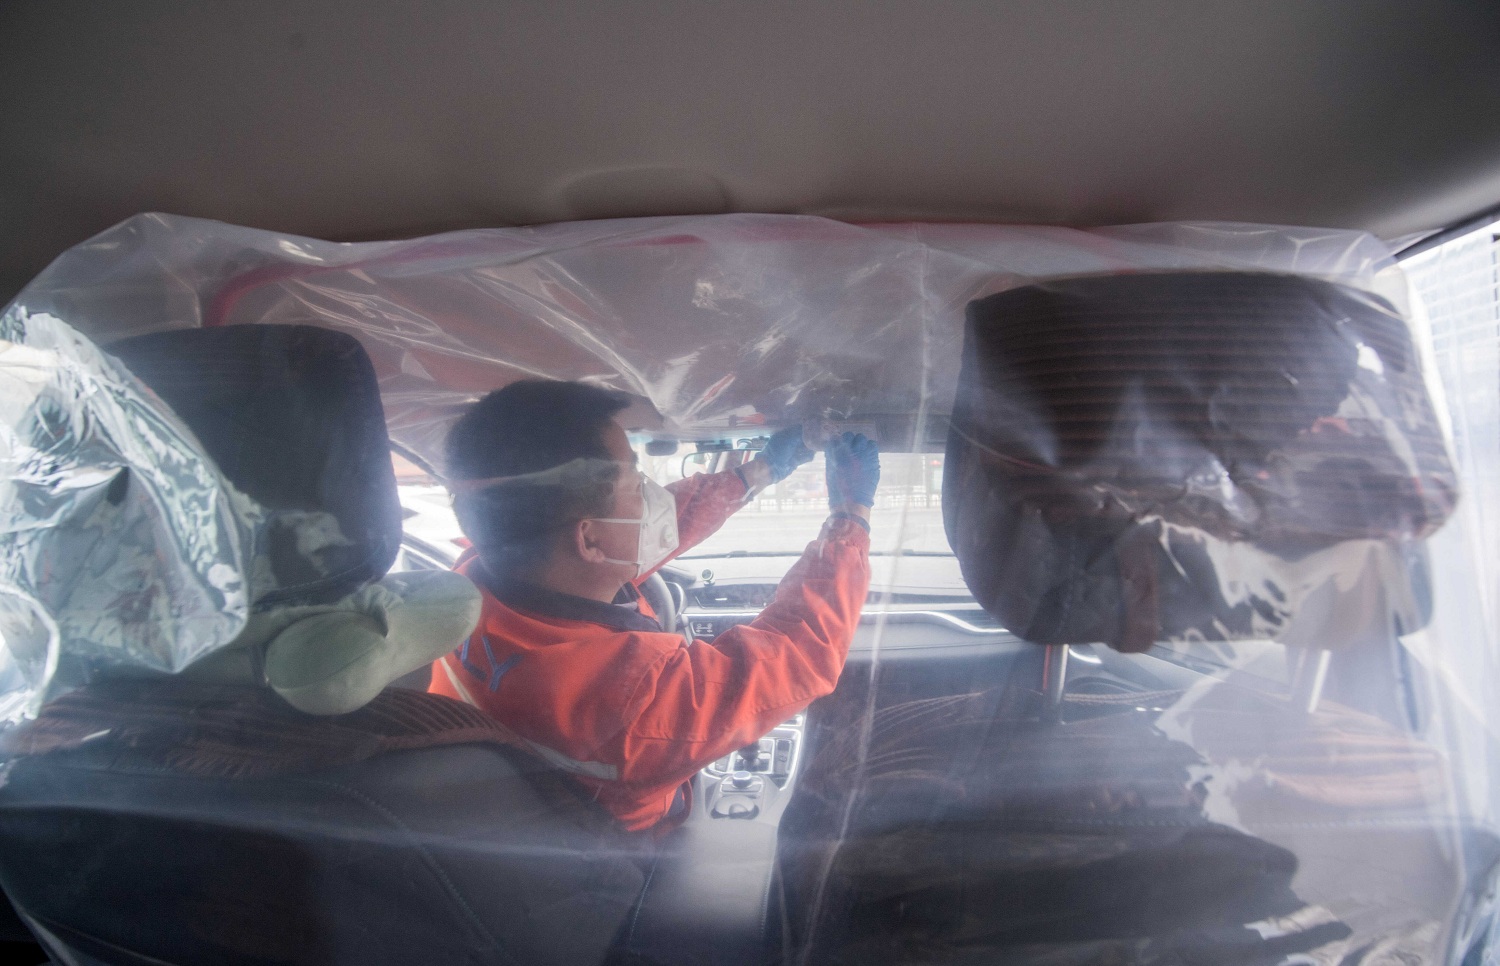 A worker installs plastic film to separate the front seats from the back inside a vehicle for a car hailing service as the country is hit by an outbreak of the novel coronavirus in Taiyuan Shanxi province